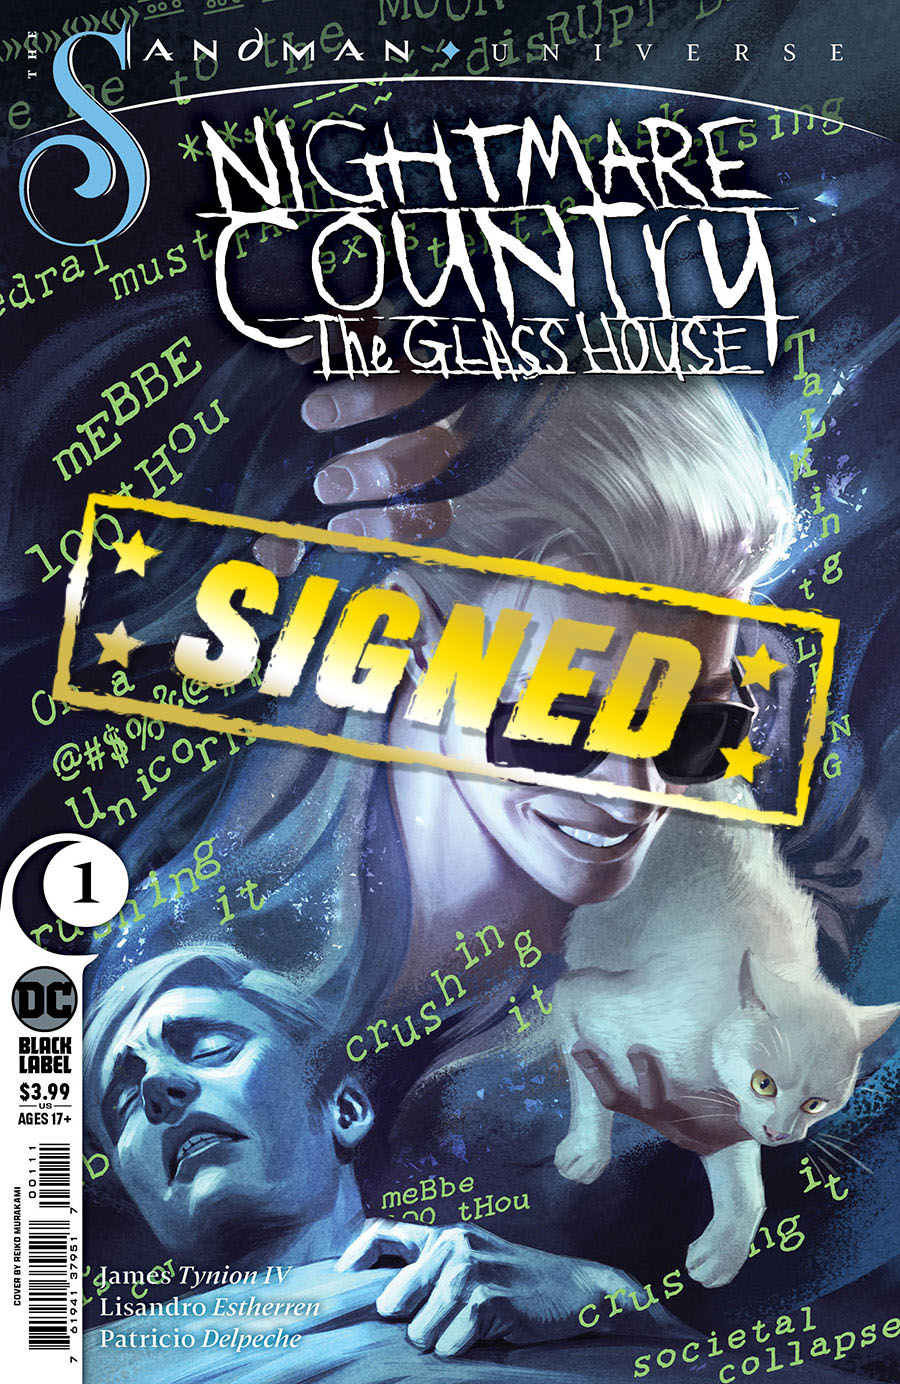 Sandman Universe Nightmare Country The Glass House #1 Cover G Regular Reiko Murakami Cover Signed By James Tynion IV